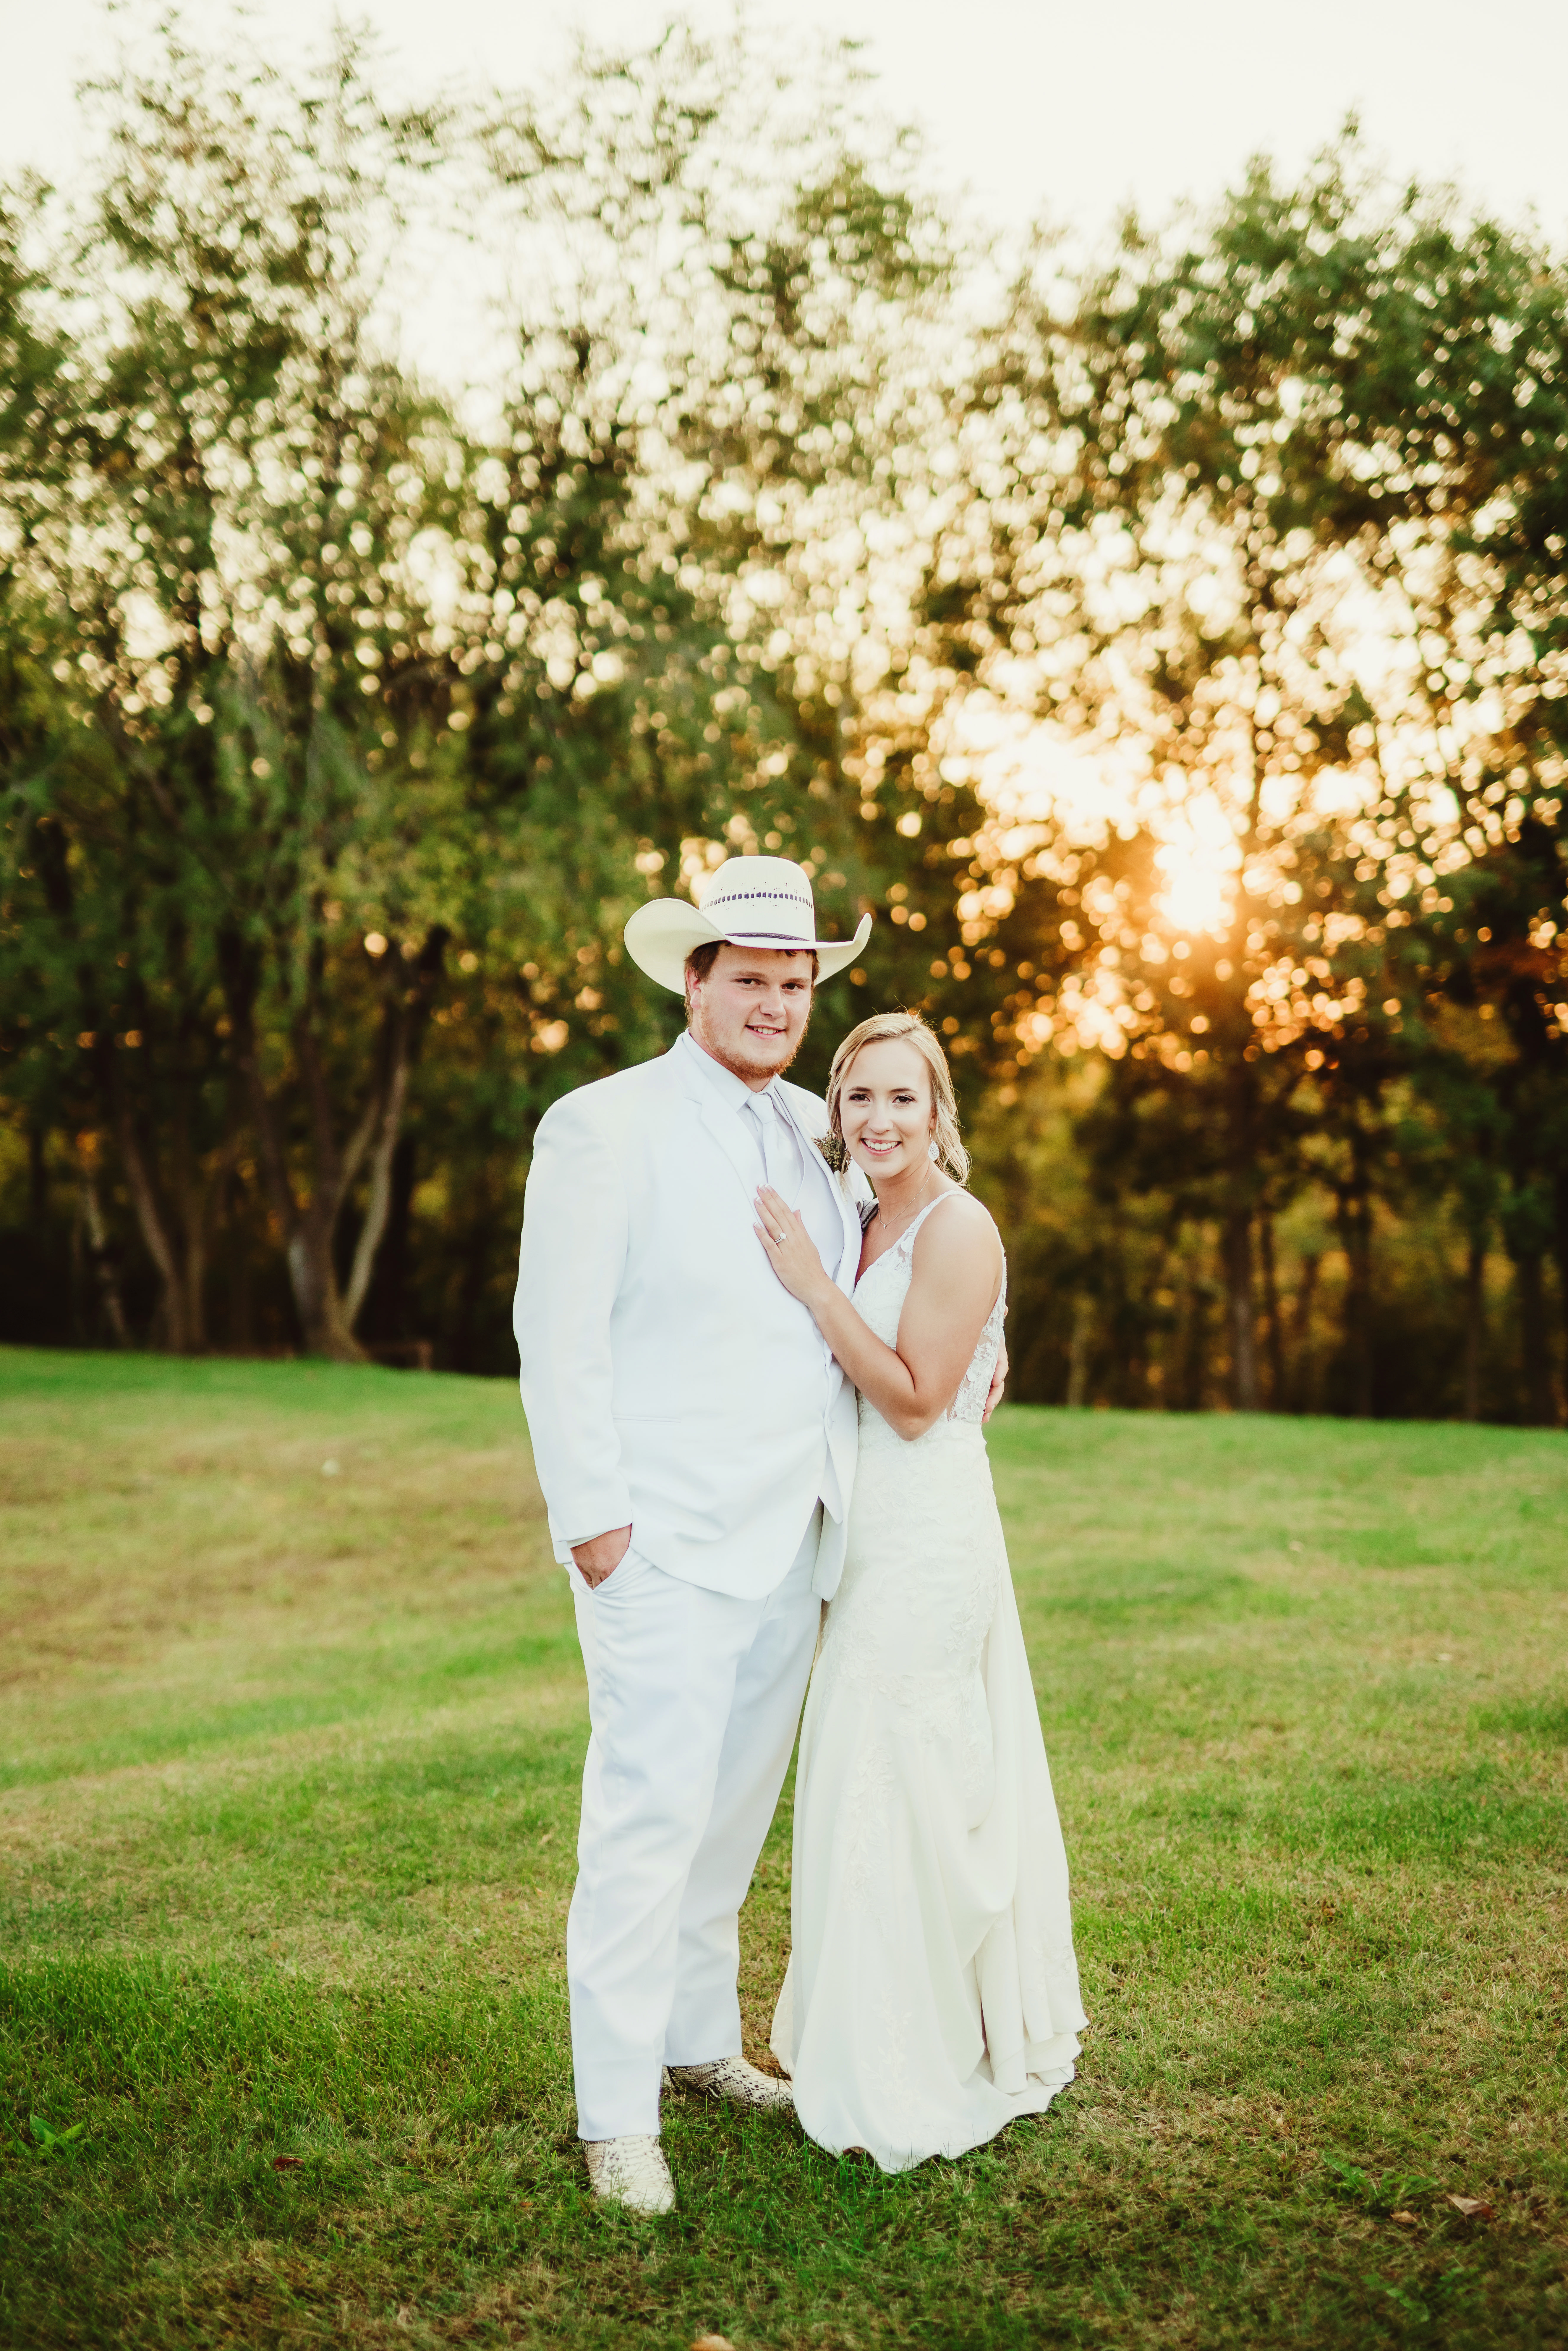 A Wisconsin groom poses with his bride in a white western suit, white cowboy boots, and white cowboy hat. Golden hour bridals Western bride and groom #weddingplanning #weddingtimeline #diywedding #wisconsinweddingphotographer #wisconsinchurchwedding